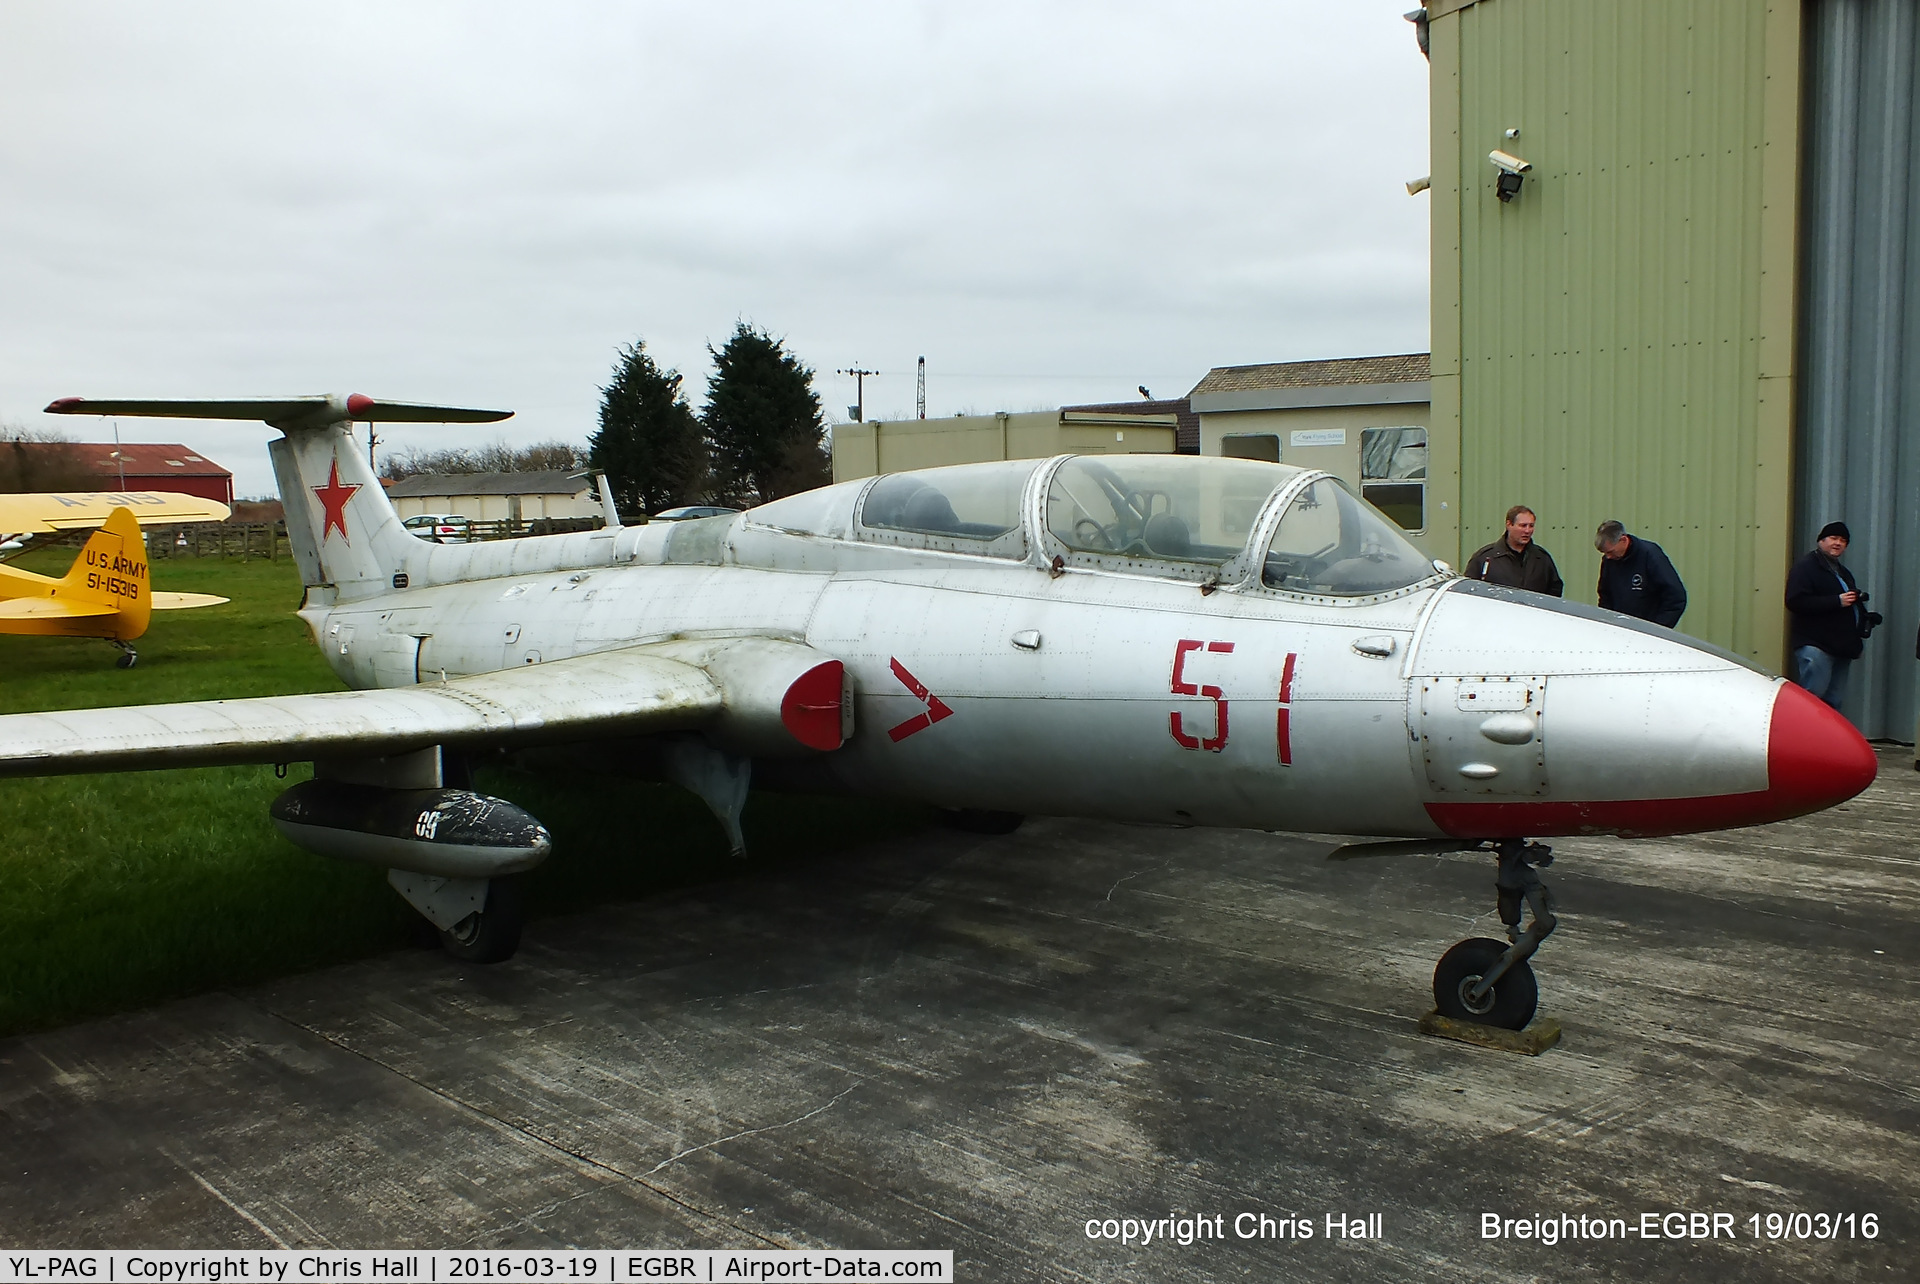 YL-PAG, Aero L-29 Delfin C/N 491273, Breighton gate guard moved to the hangars for the winter, it will be cleaned before it returns to guard duties